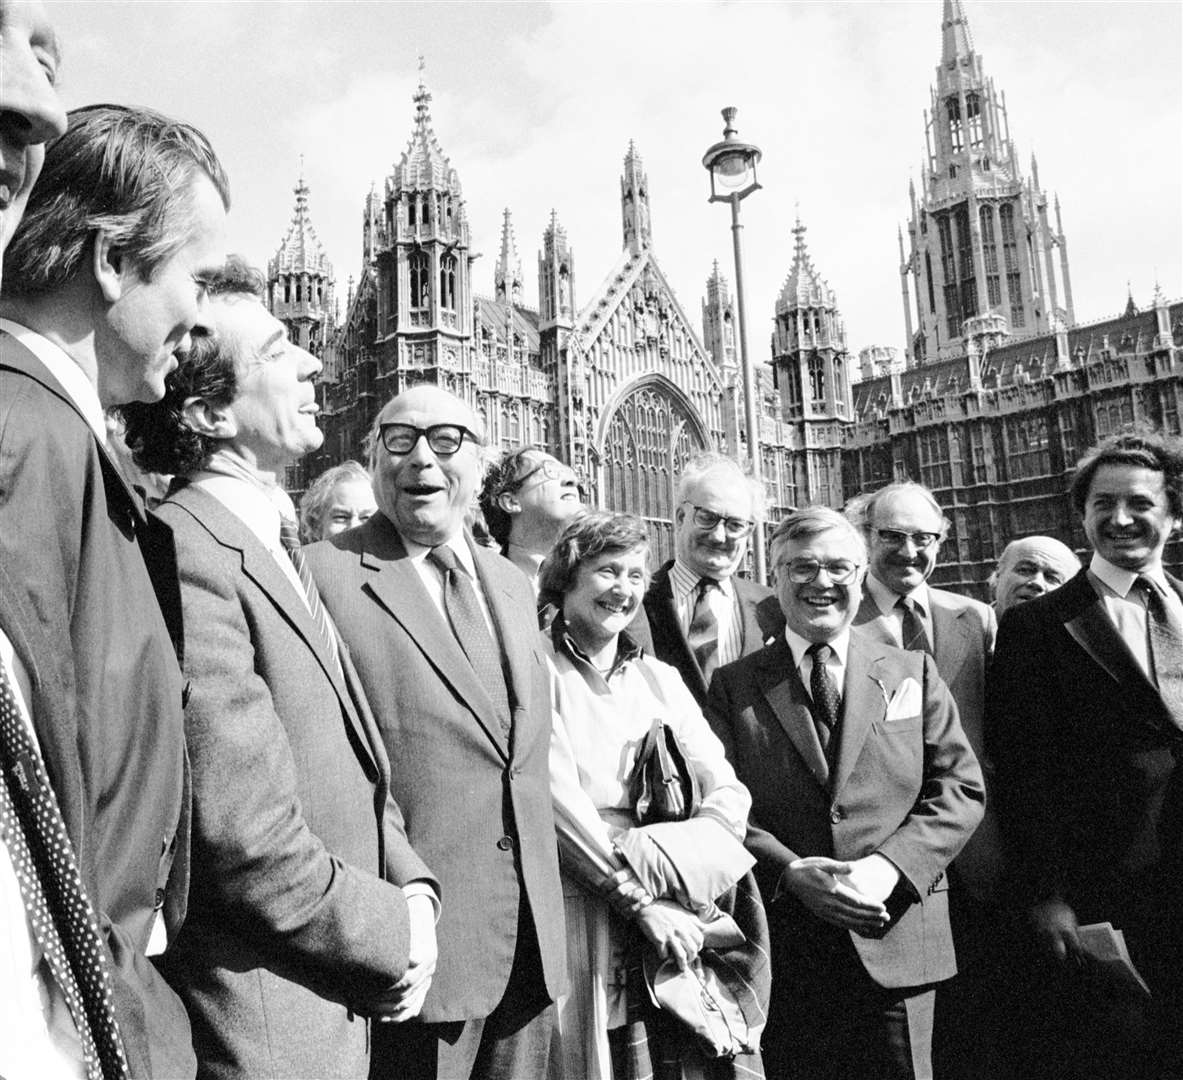 Members of the SDP outside the House of Commons in March 1982, including Roy Jenkins (third left) who had recently won a by-election in Glasgow, along with co-founders (left to right) David Owen, Bill Rodgers and Shirley Williams (PA)